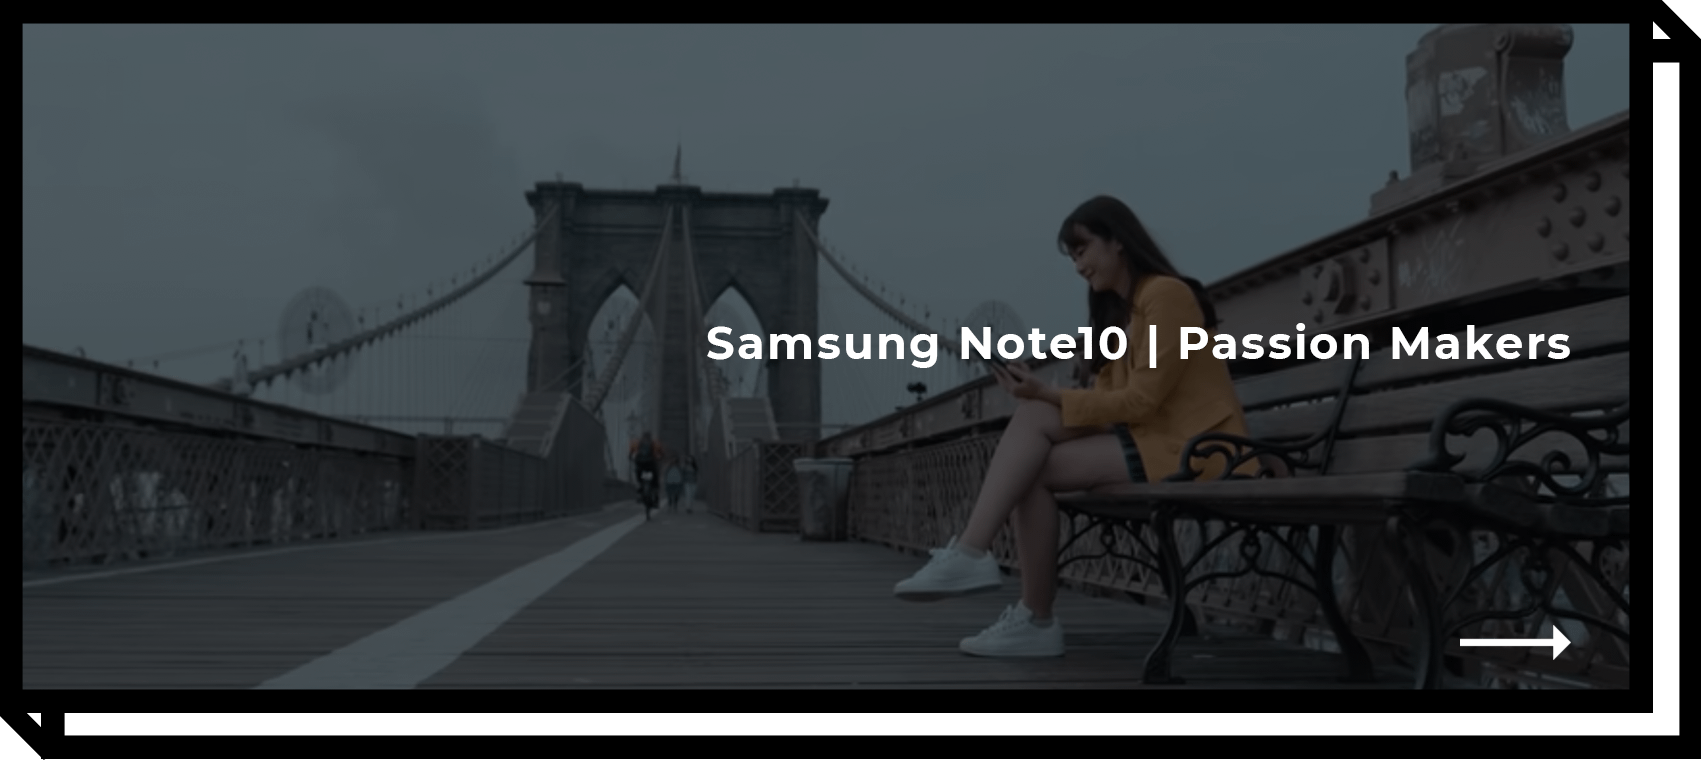 Samsung Note10 - Passion Makers